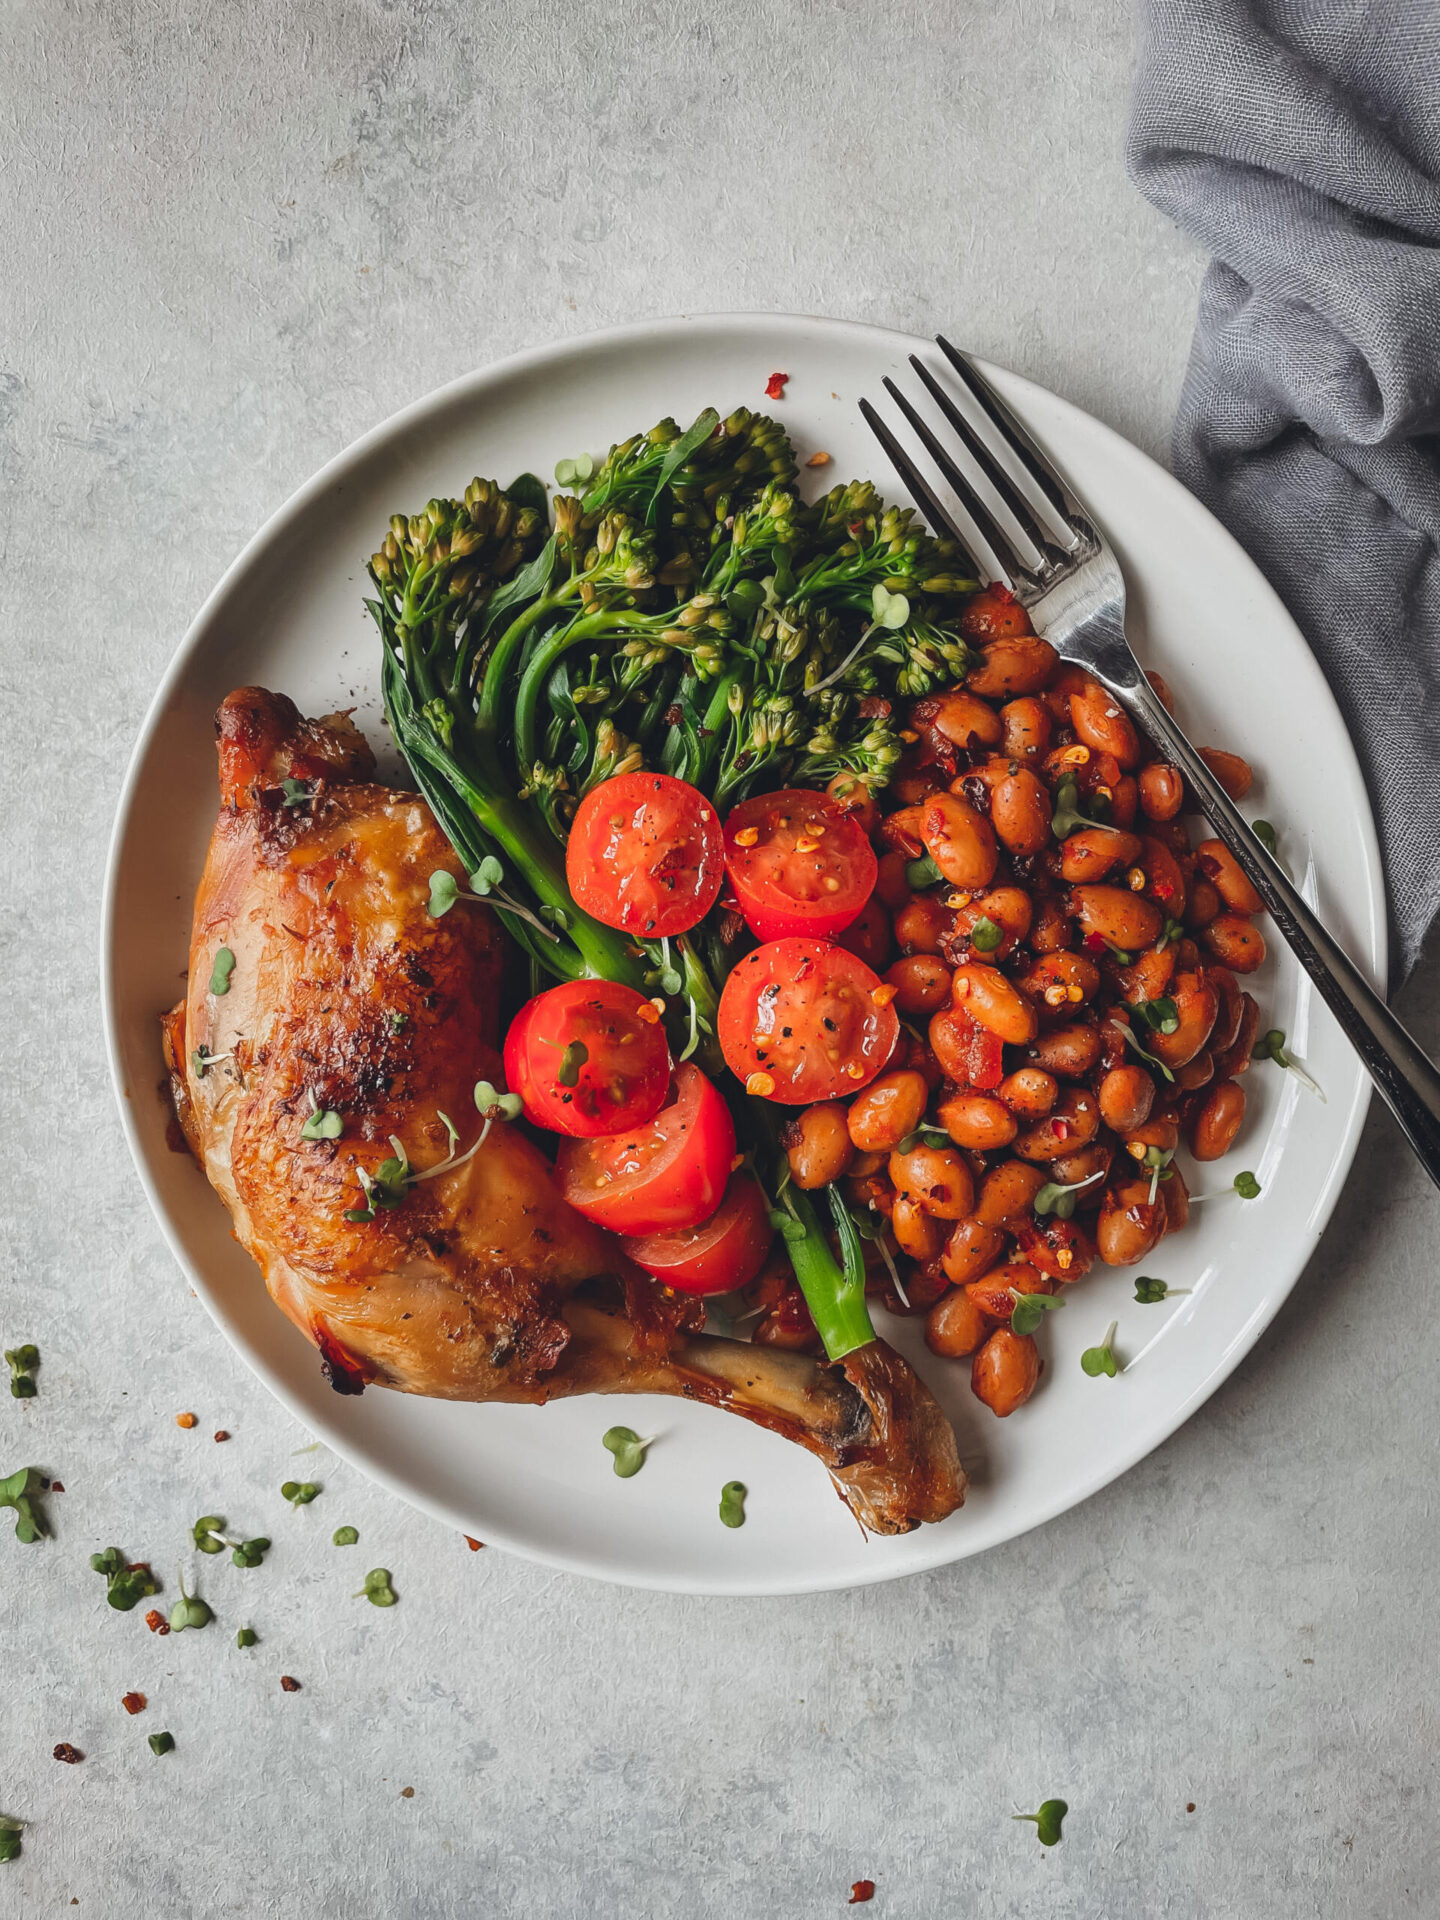 Chipotle beans, roast chicken and broccolini 1